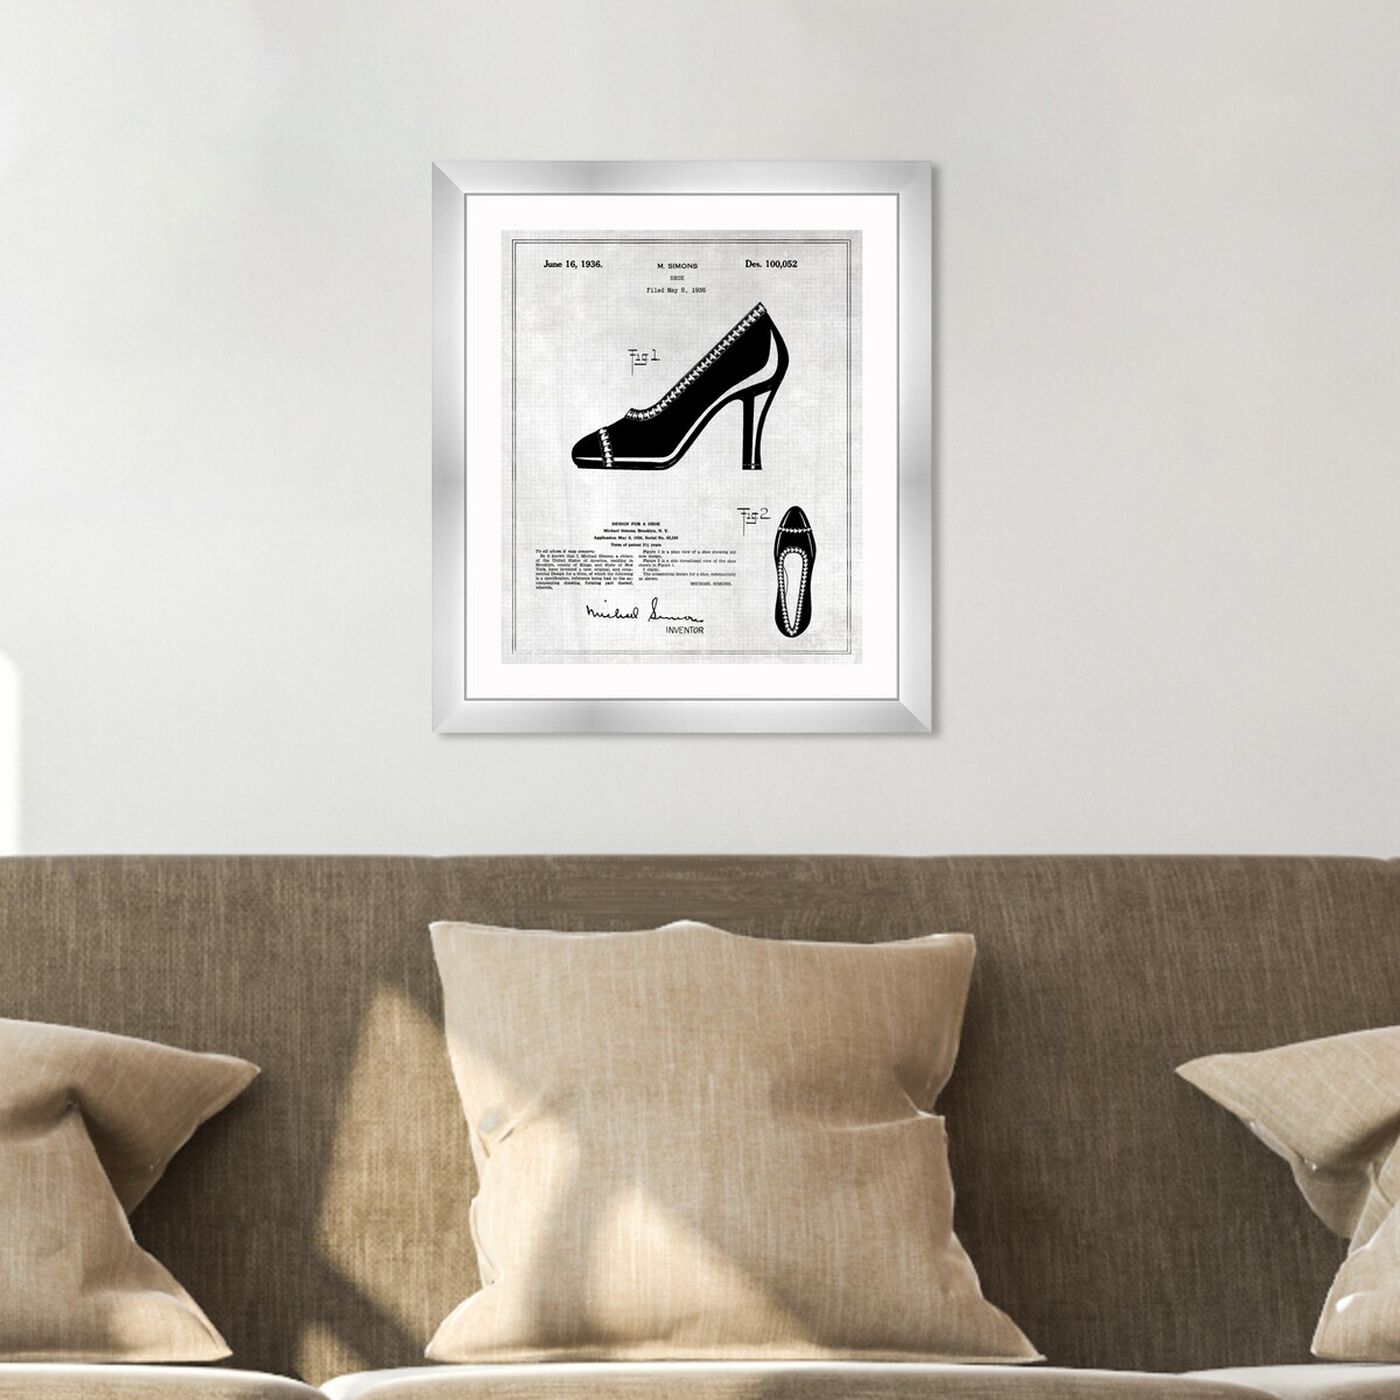 Hanging view of Iconic Design for a Shoe 1936 featuring fashion and glam and shoes art.